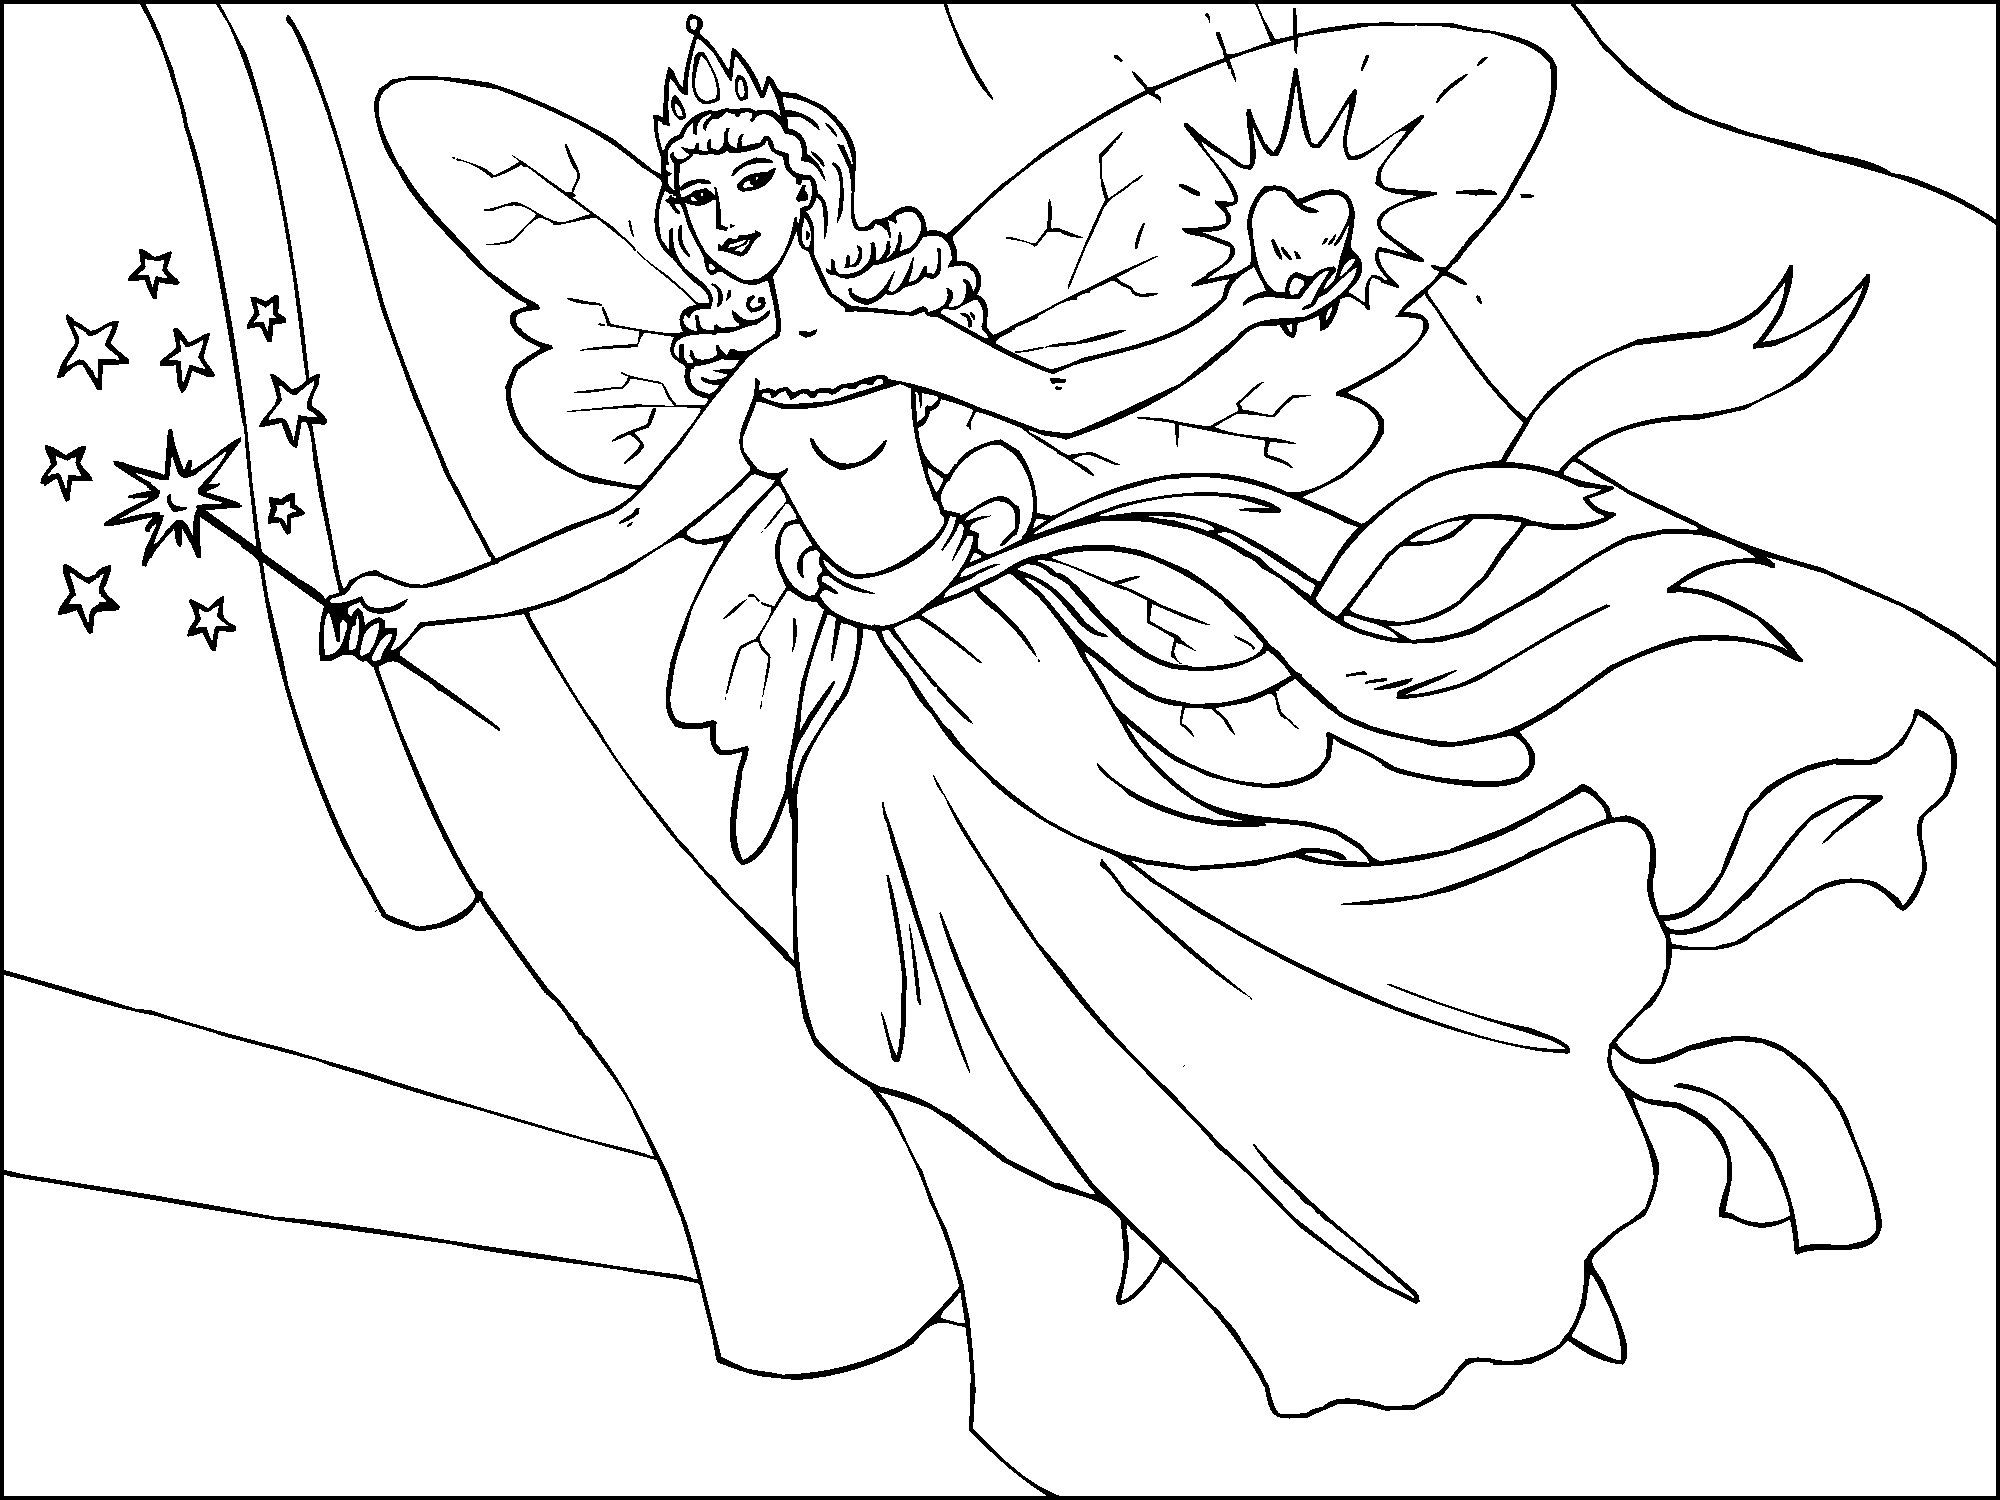 Free Printable Fairy Coloring Pages For Kids | Everything - Free Printable Fairy Coloring Pictures